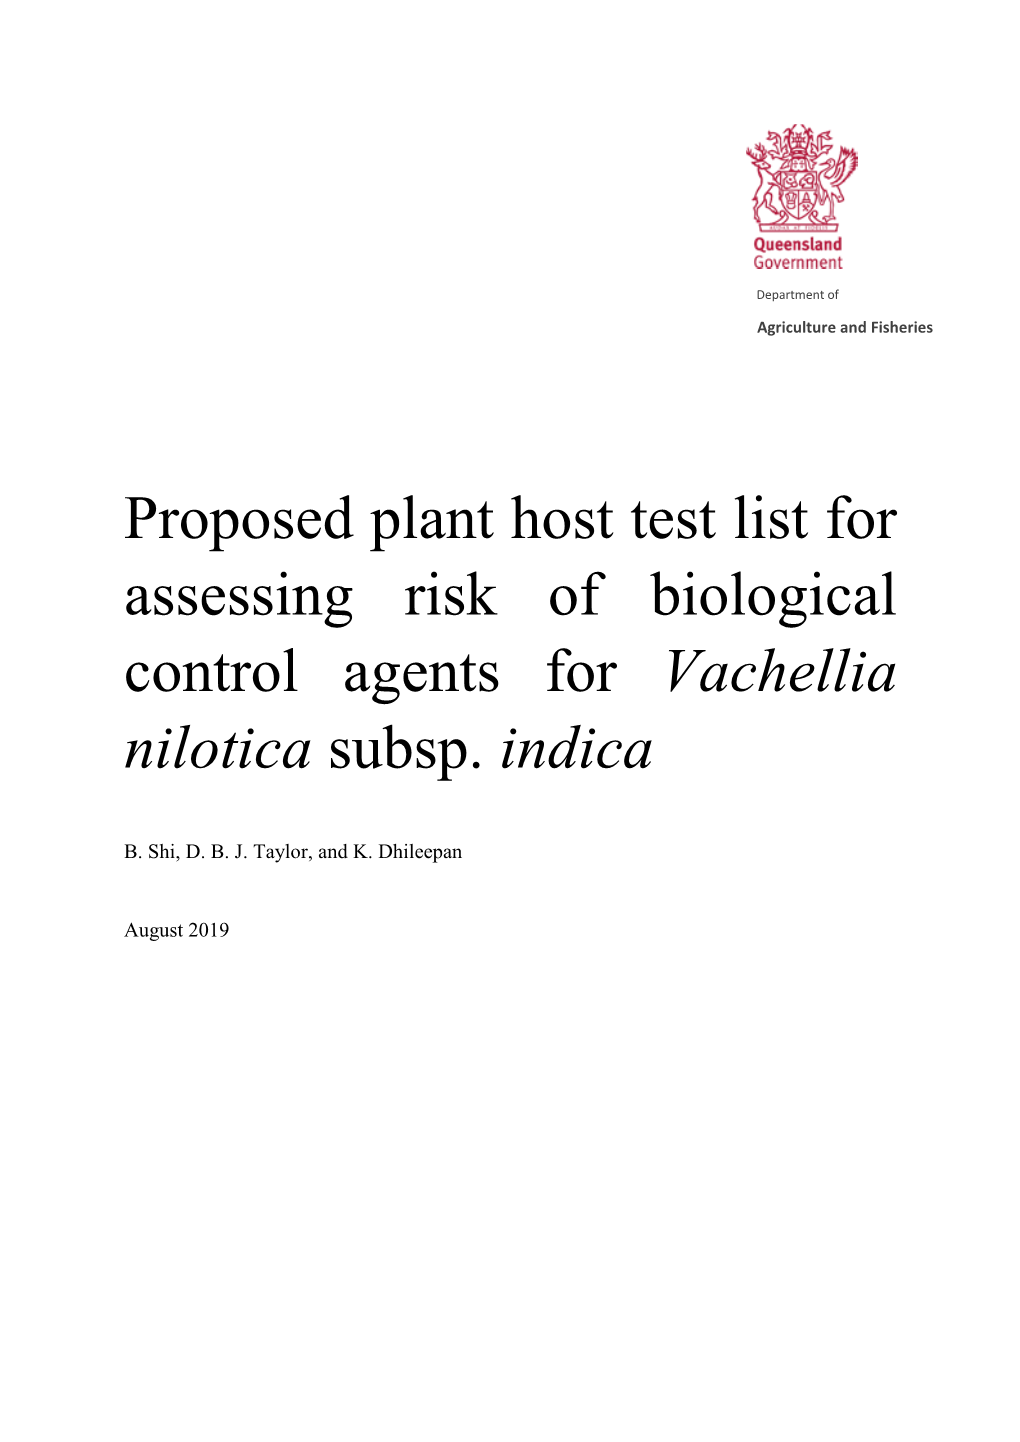 Proposed Plant Host Test List for Assessing Risk of Biological Control Agents for Vachellia Nilotica Subsp